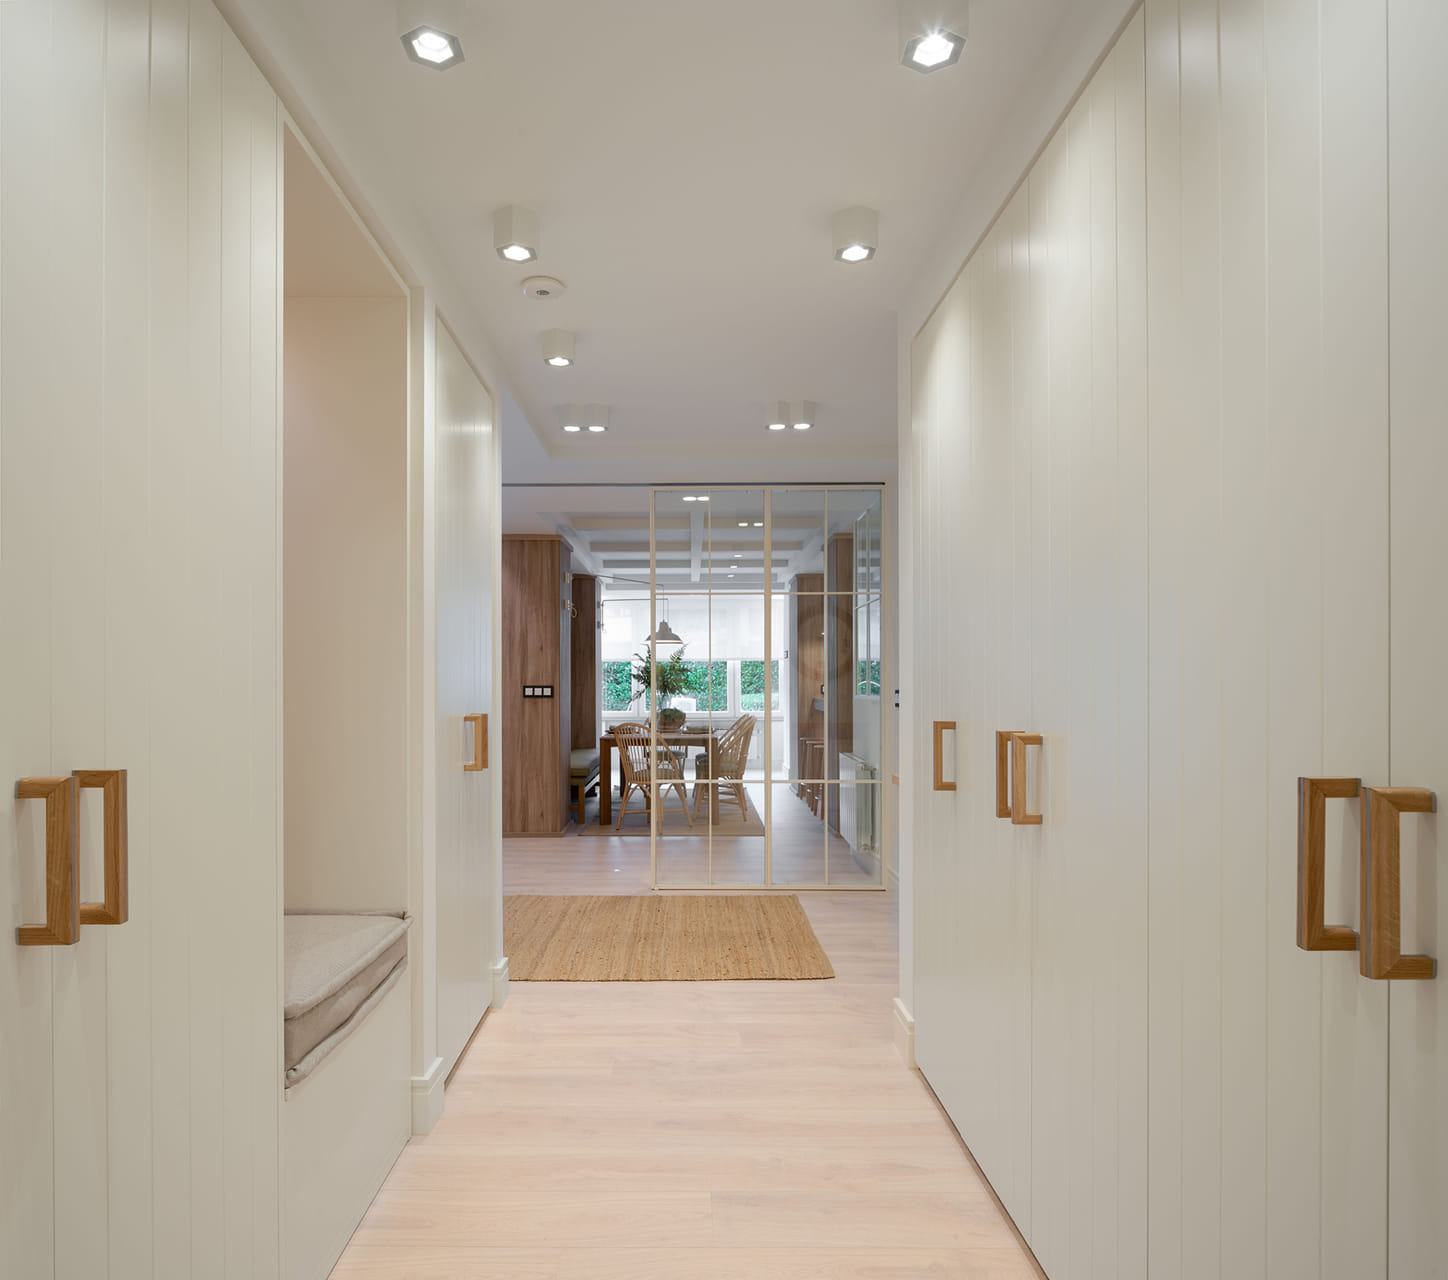 Corridor with tall units in white and wood